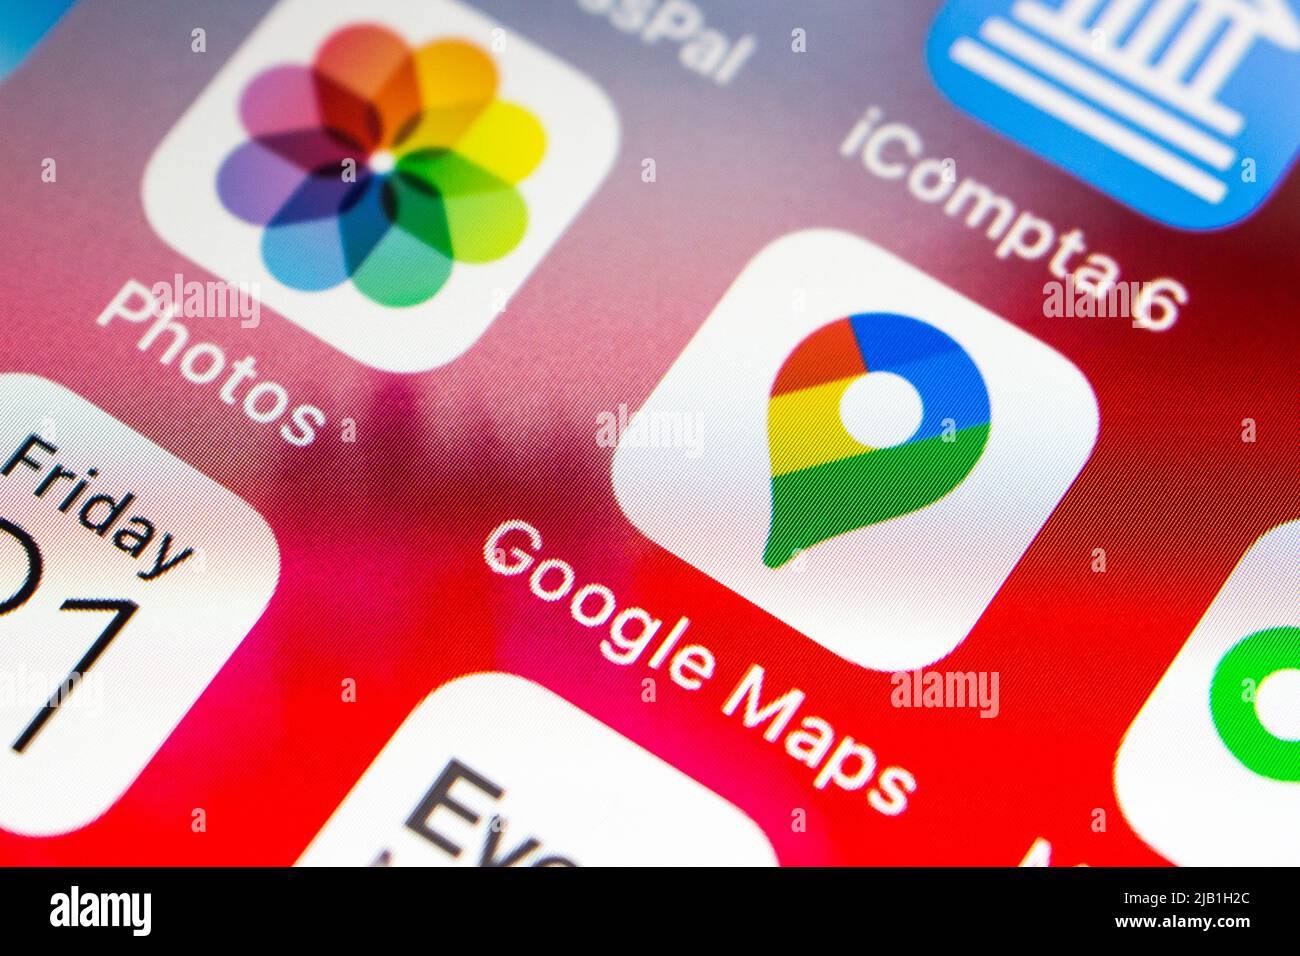 Kumamoto, Japan - Feb 20 2020 : Google Maps app on iPhone screen. Google Maps is a web mapping platform and consumer application developed by Google Stock Photo